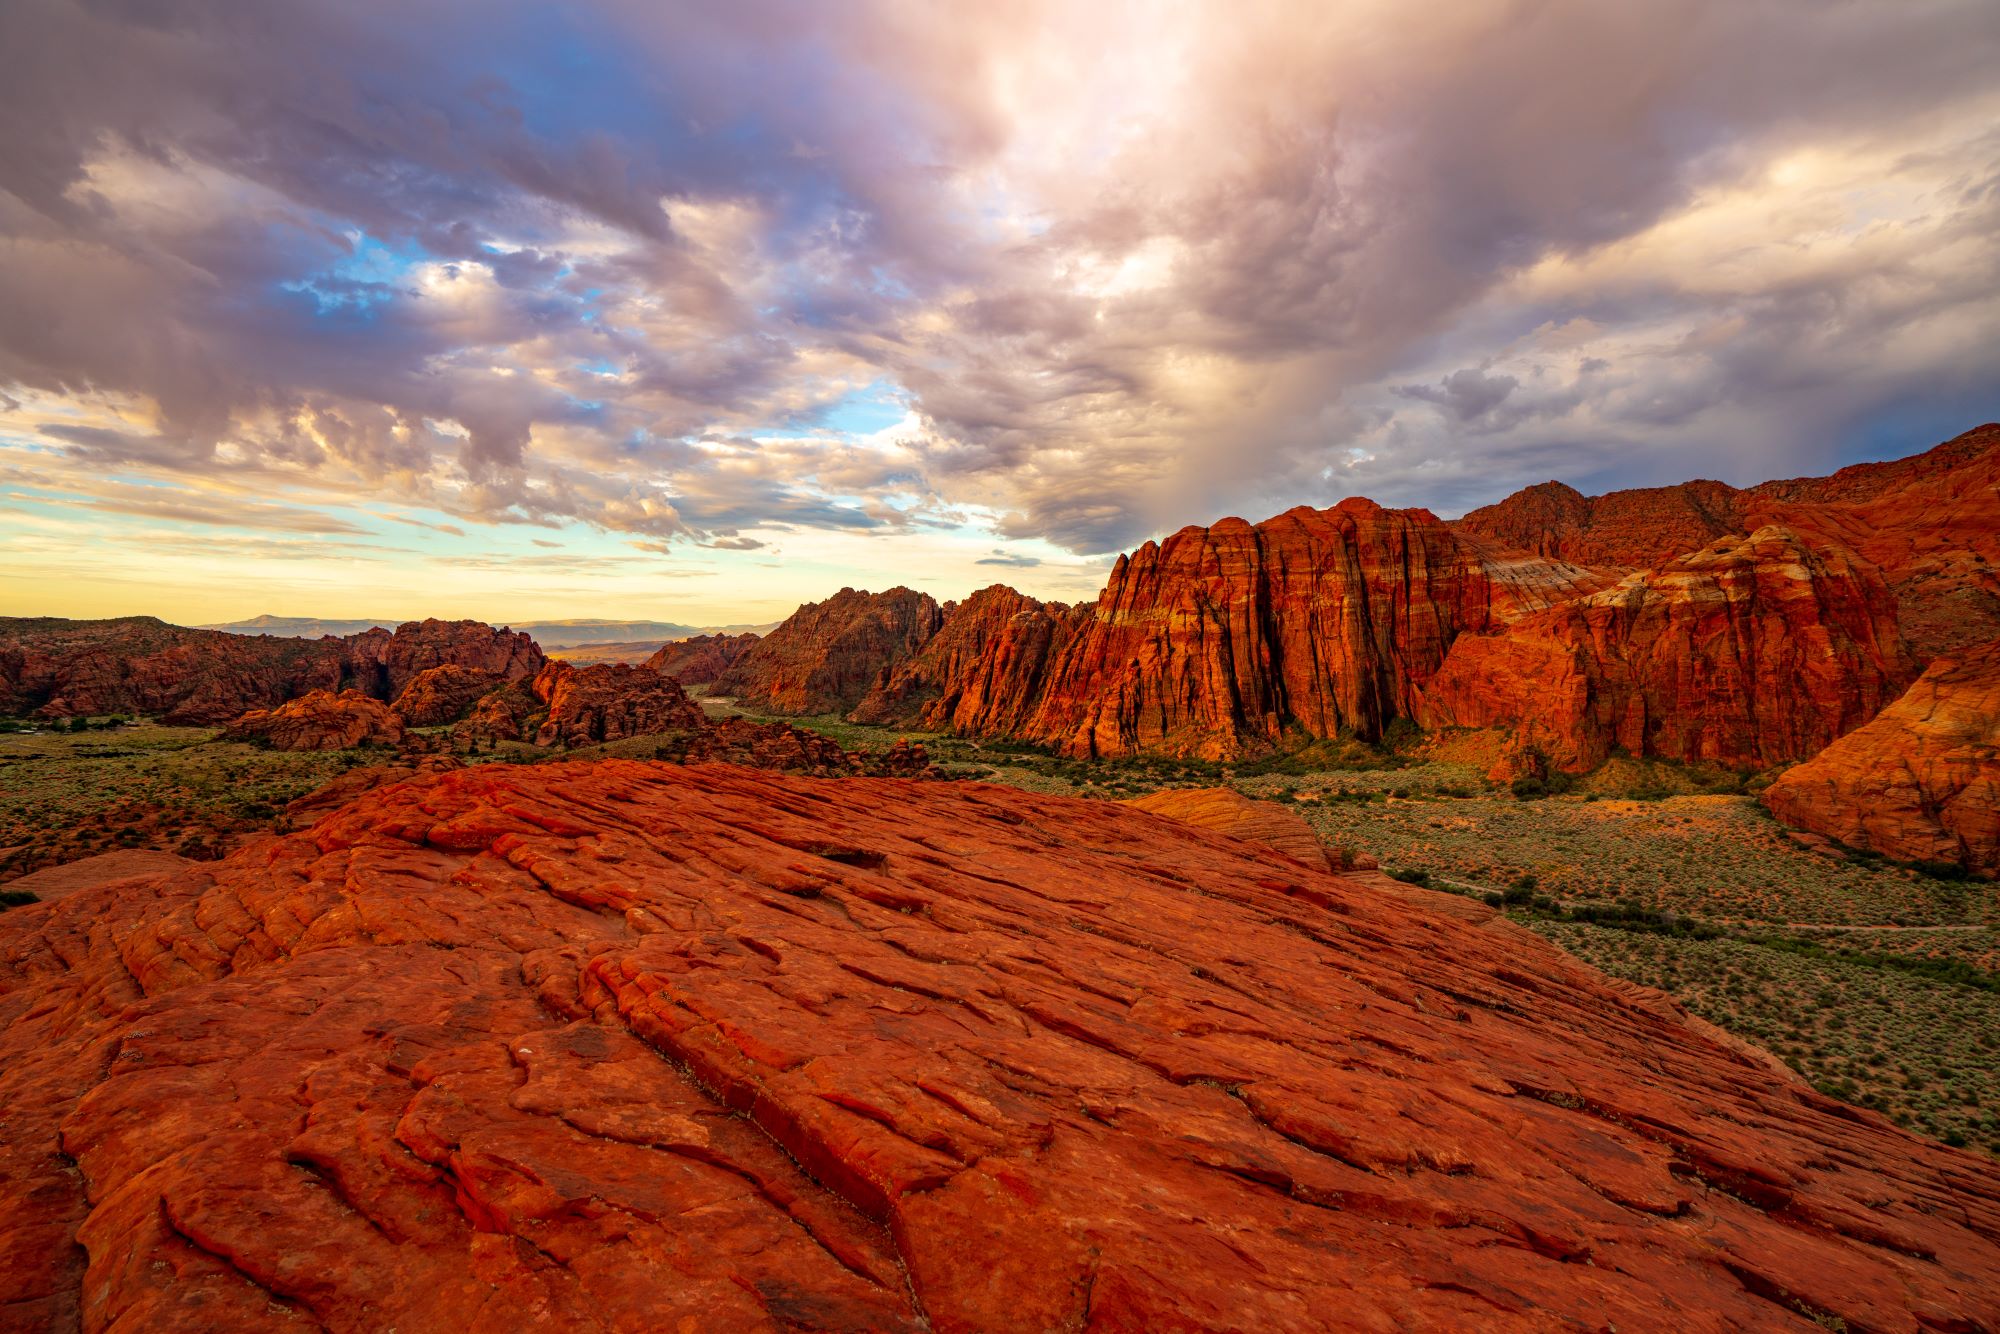 Red rocks at Sunrise from the Petrfied Sand Dunes in Snow Canyon State Park.